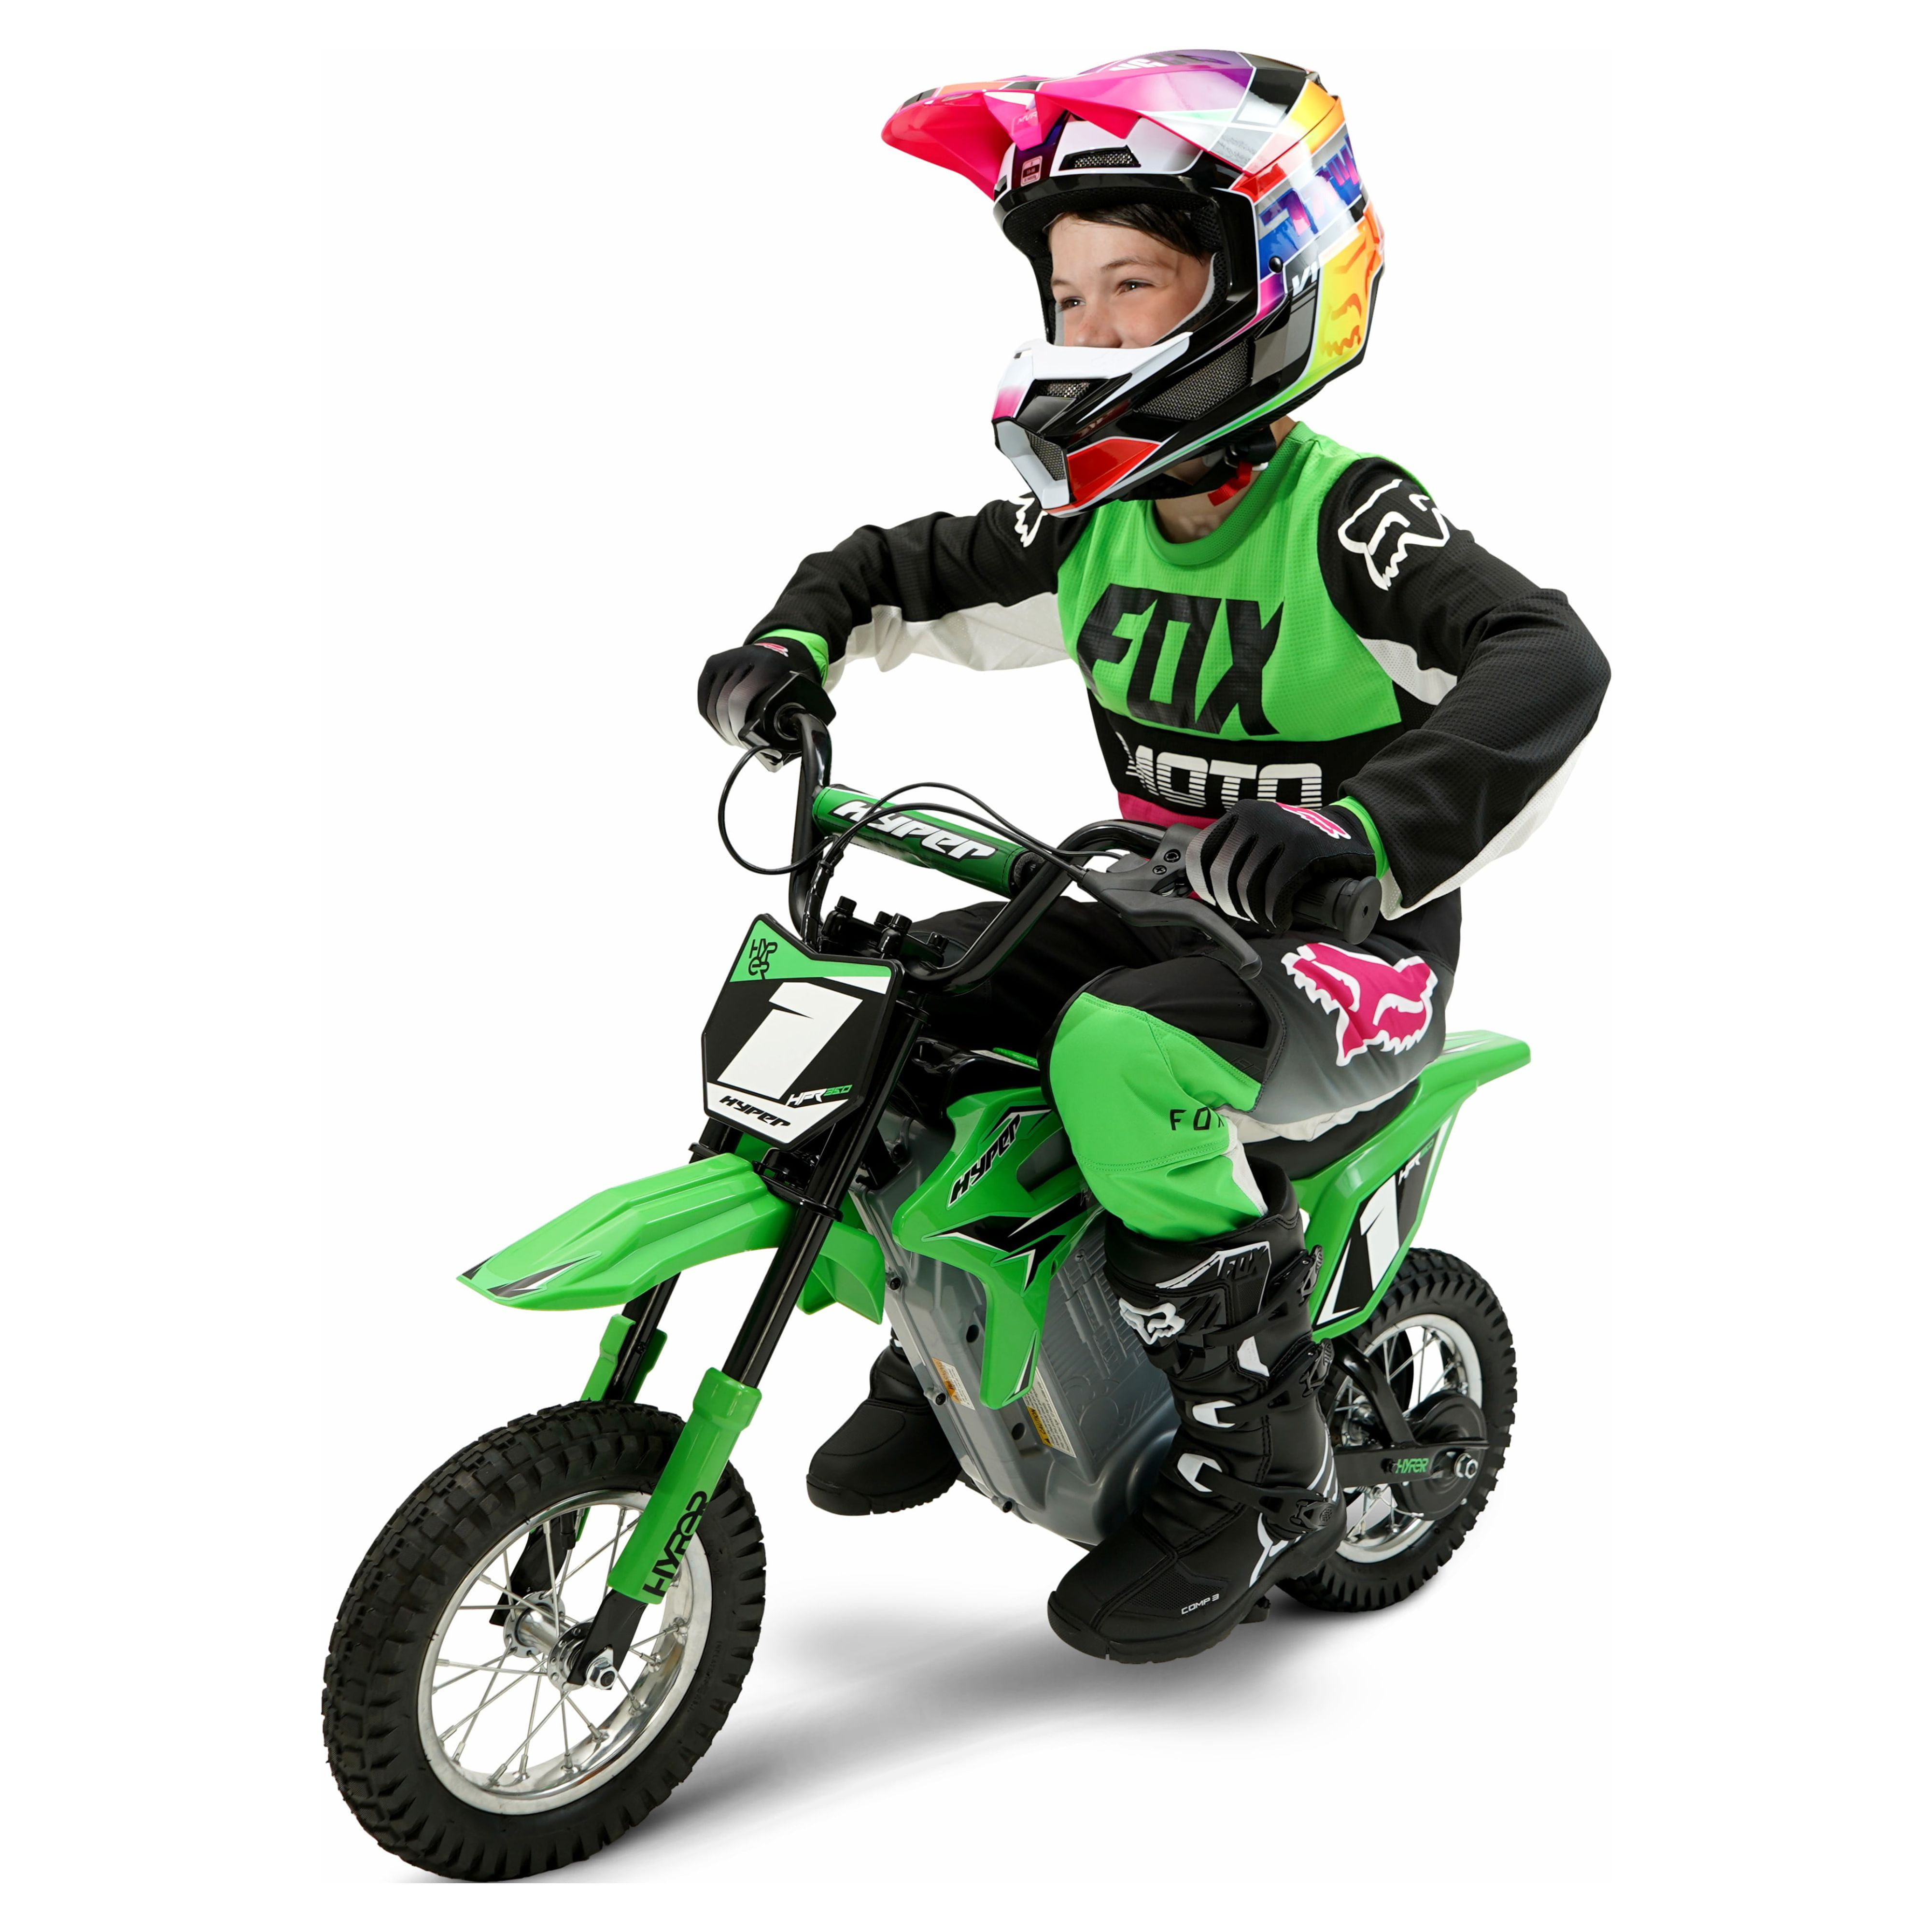 Hyper Toys HPR 350 Dirt Bike 24 Volt Electric Motorcycle in Green